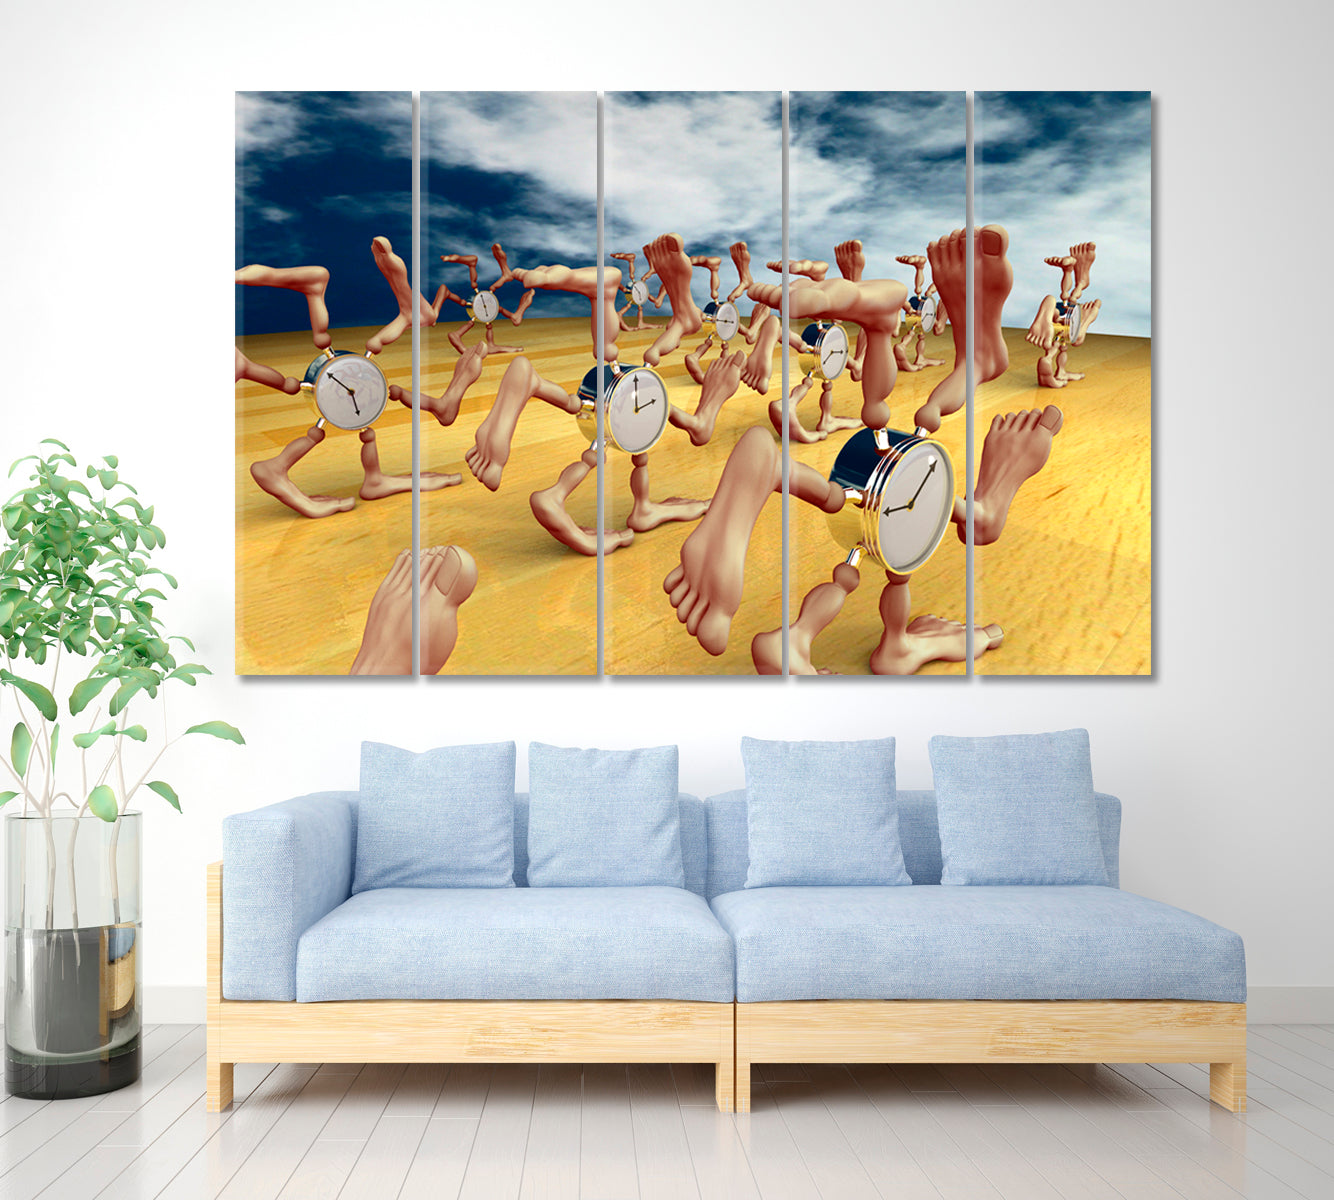 THE TIME HAS COME Inspirid by Dali Running Сlocks with Lots of Legs Surreal Fantasy Large Art Print Décor Artesty   